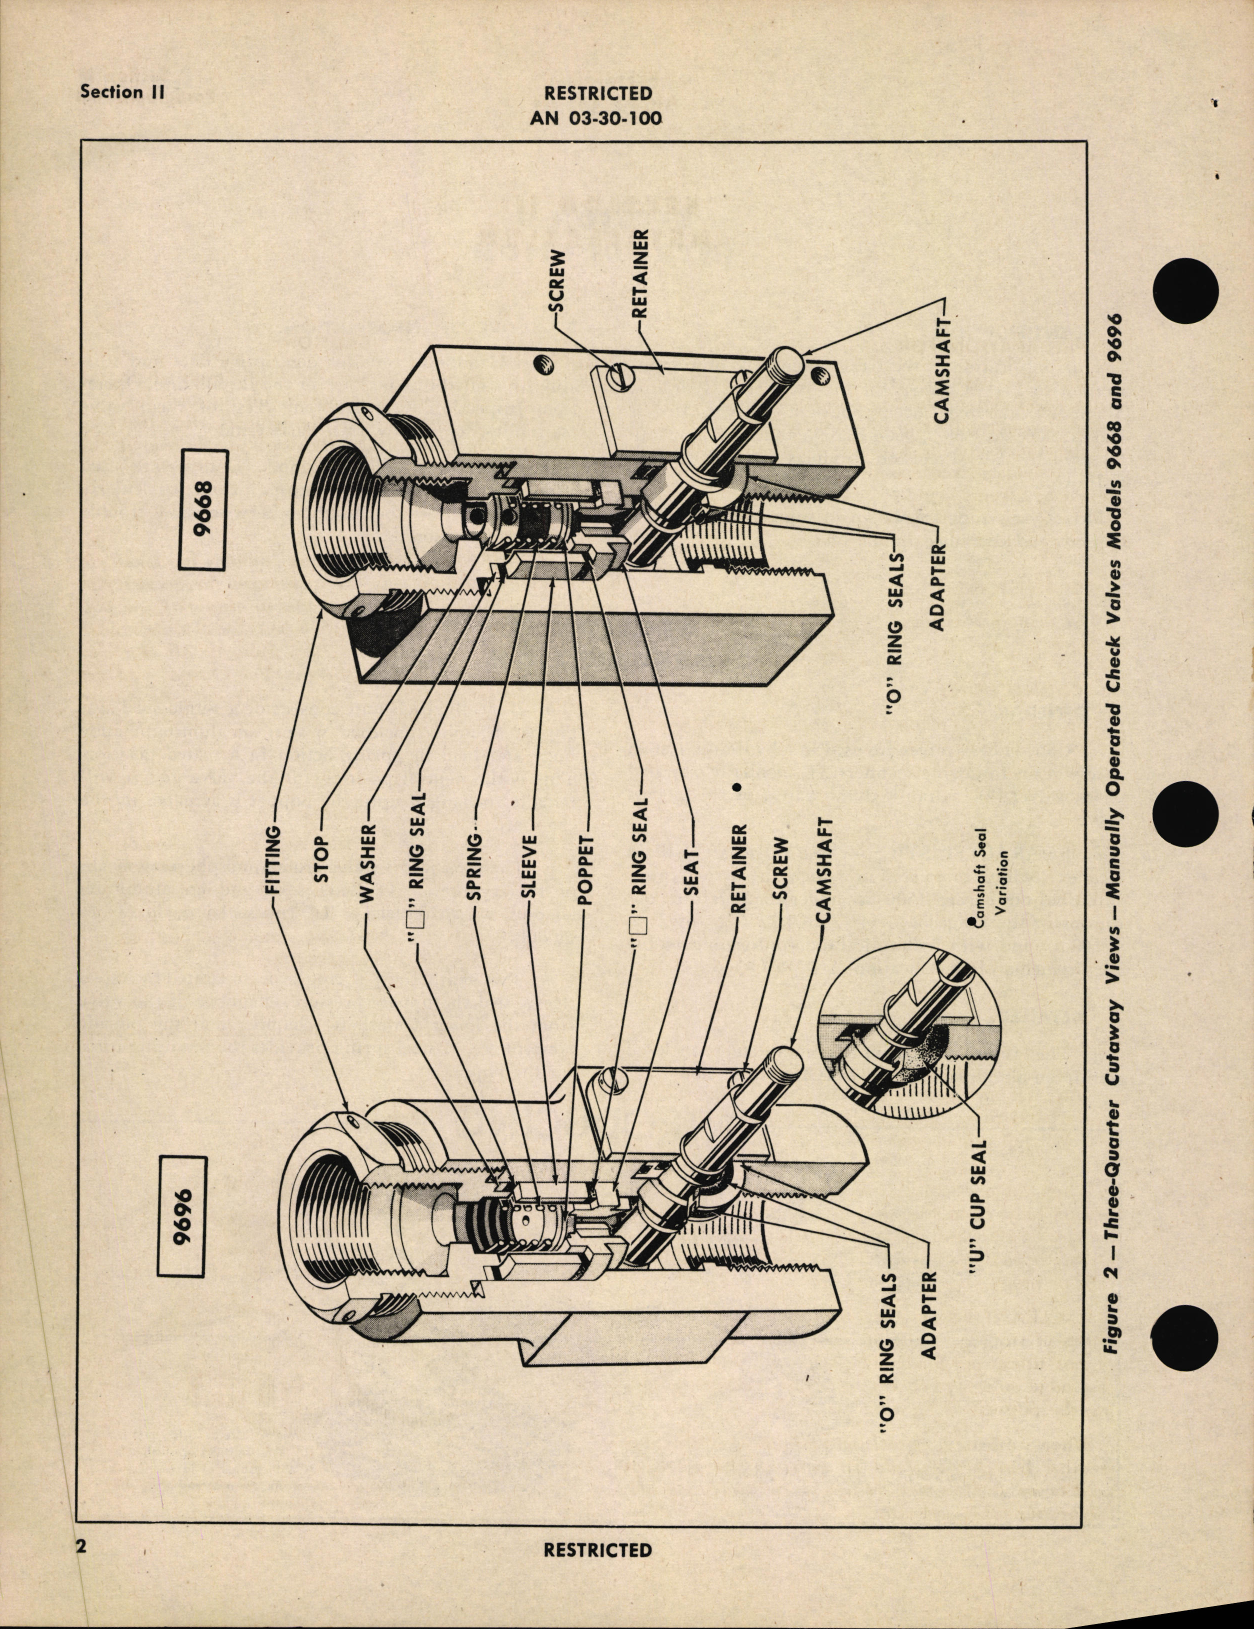 Sample page 6 from AirCorps Library document: Handbook of Instructions with Parts Catalog for Steel Seat Hydraulic Manually Operated Check (Shut-Off) Valves 